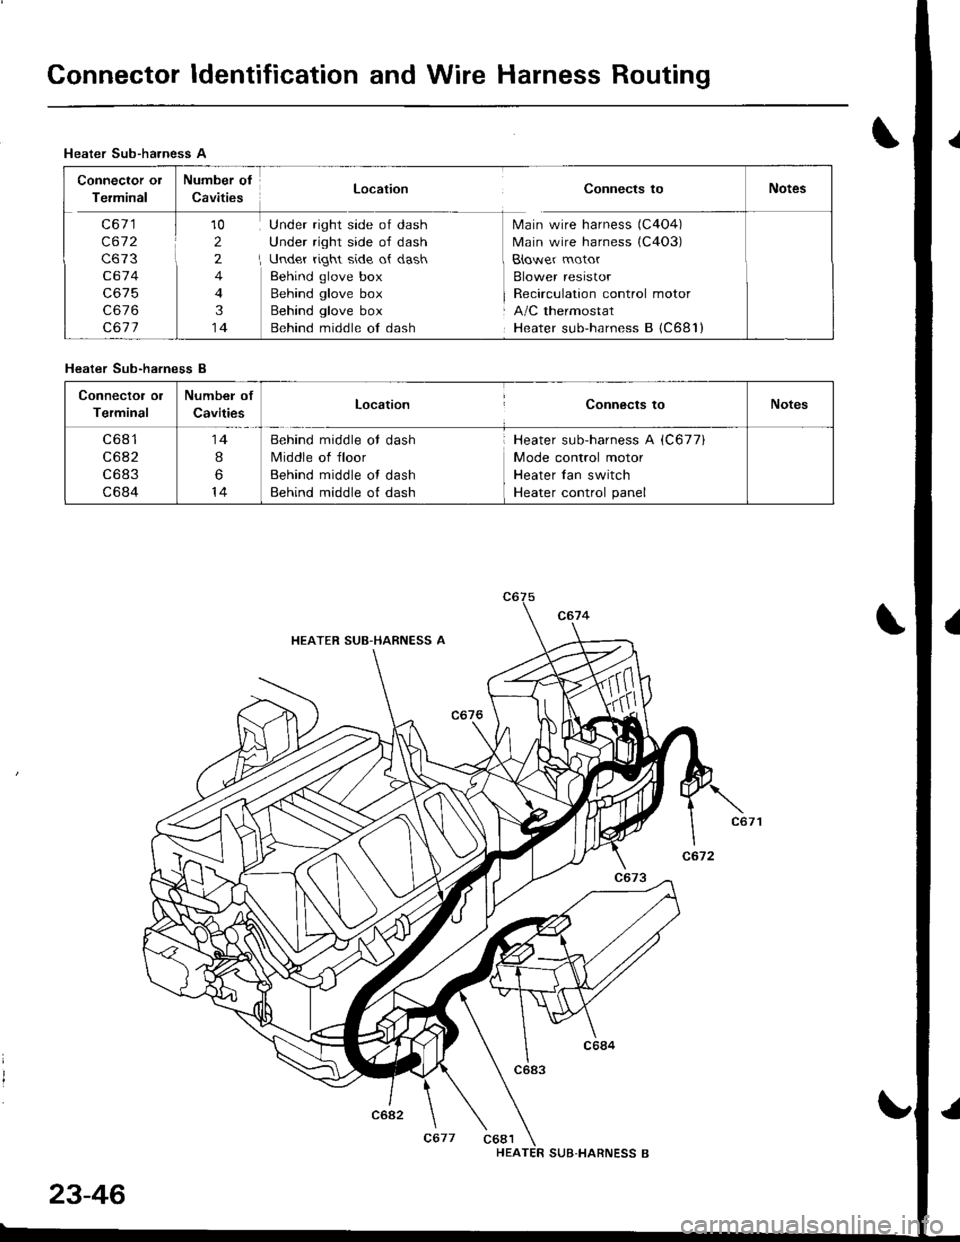 HONDA INTEGRA 1998 4.G Workshop Manual Connector ldentification and Wire Harness Routing
Heater Sub-harness A
Connector or Number of-::- --. - .- -:-".: -- Location Connects toI etmtnal uavtt|esNotes
C671 J 10 Under right side of dash M